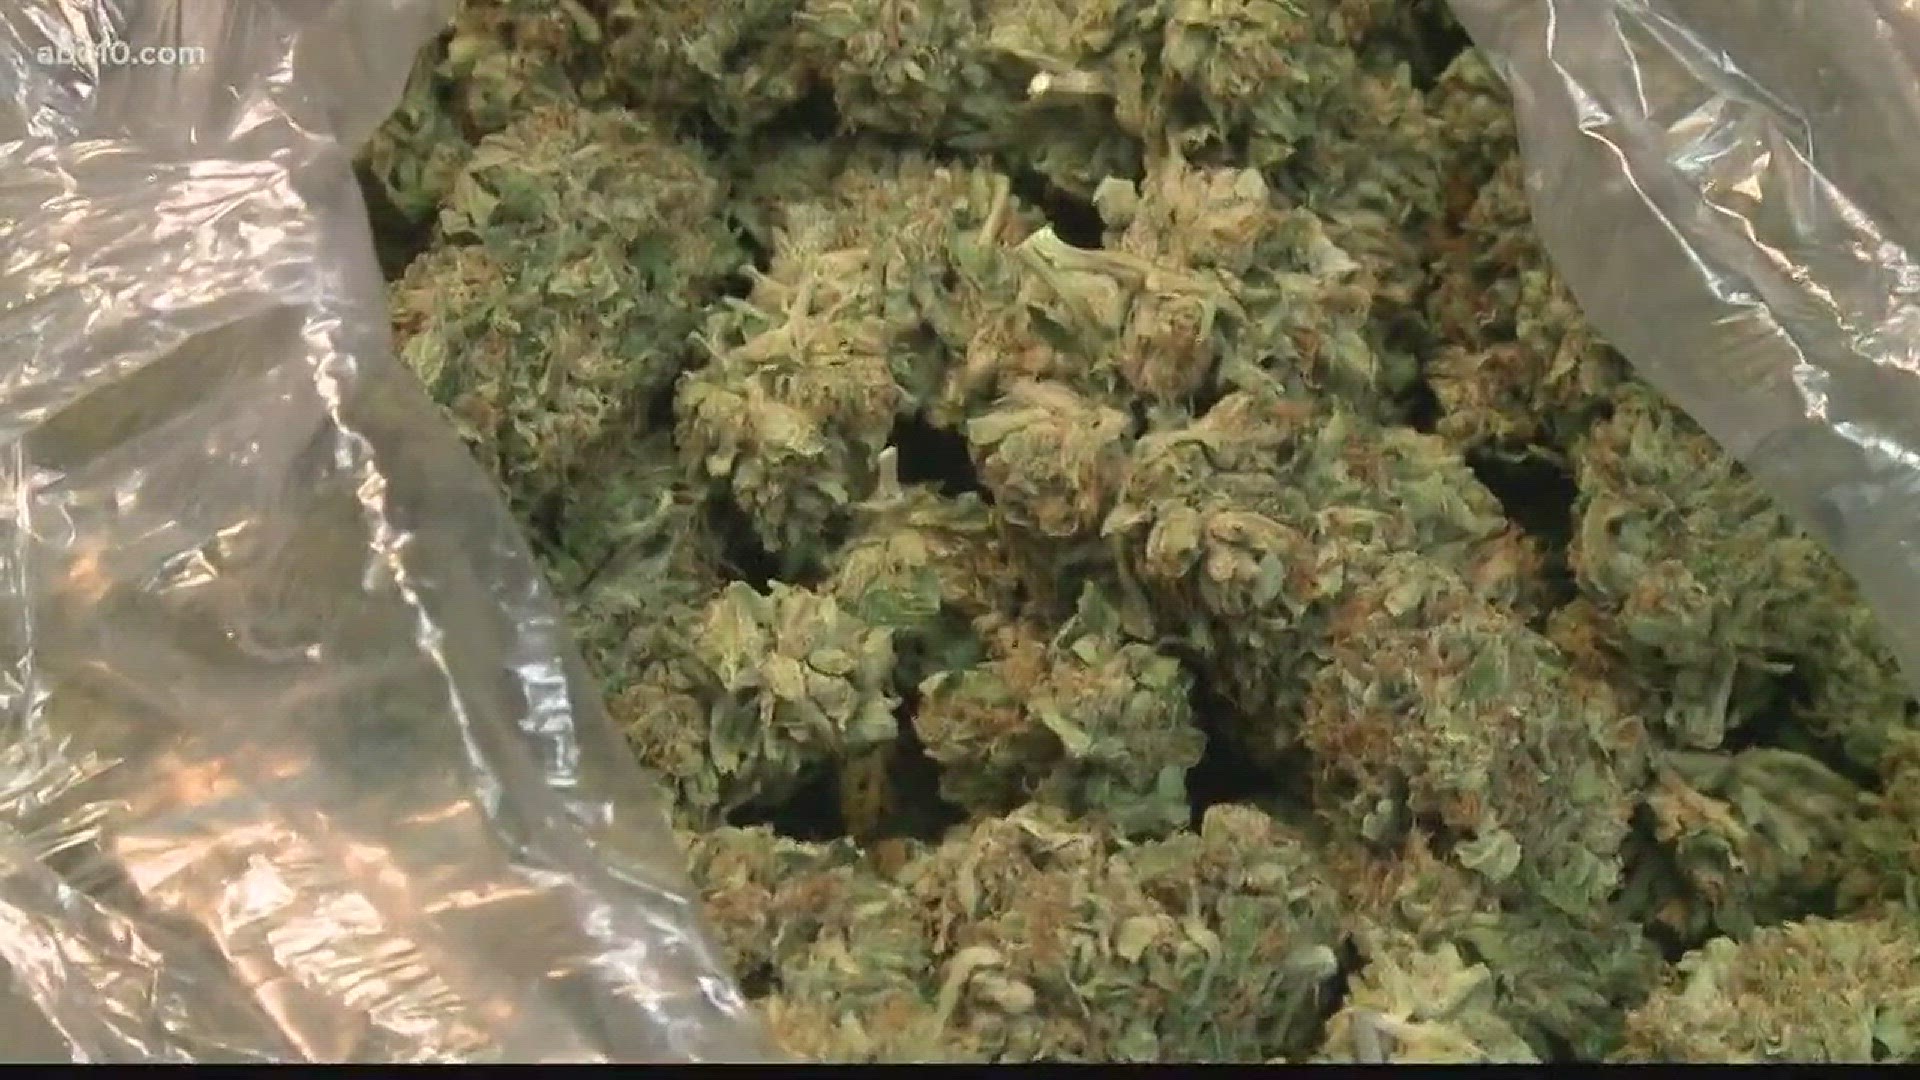 Yolo County is still focused on what to do about their medical marijuana laws.